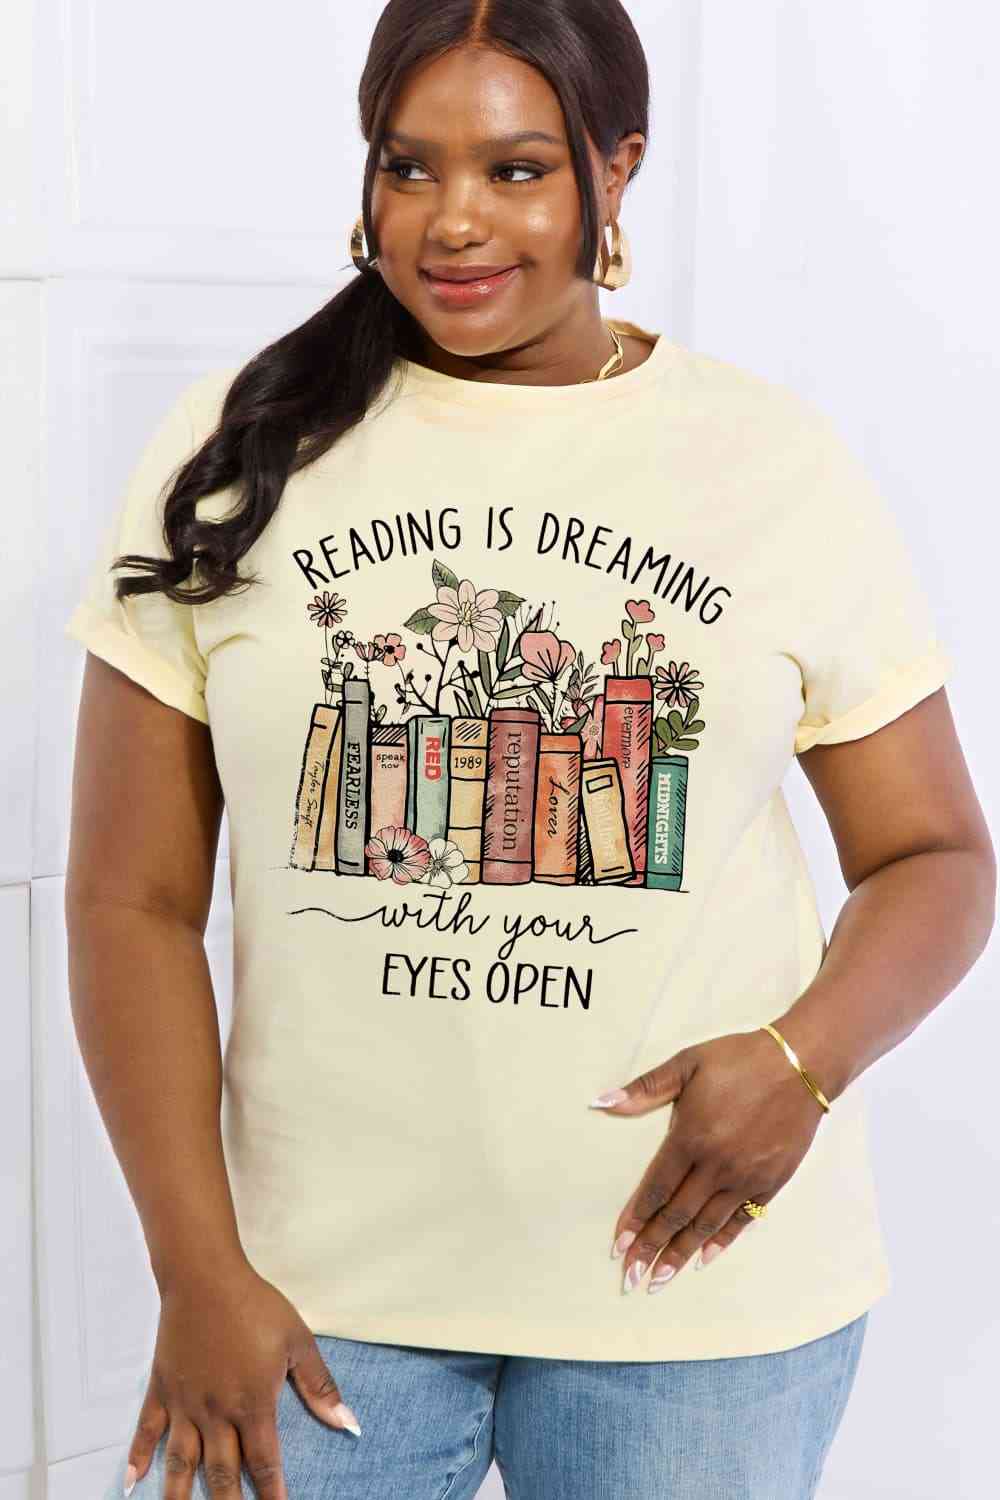 READING IS DREAMING WITH YOUR EYES OPEN Graphic Cotton Tee - T-Shirts - Shirts & Tops - 17 - 2024